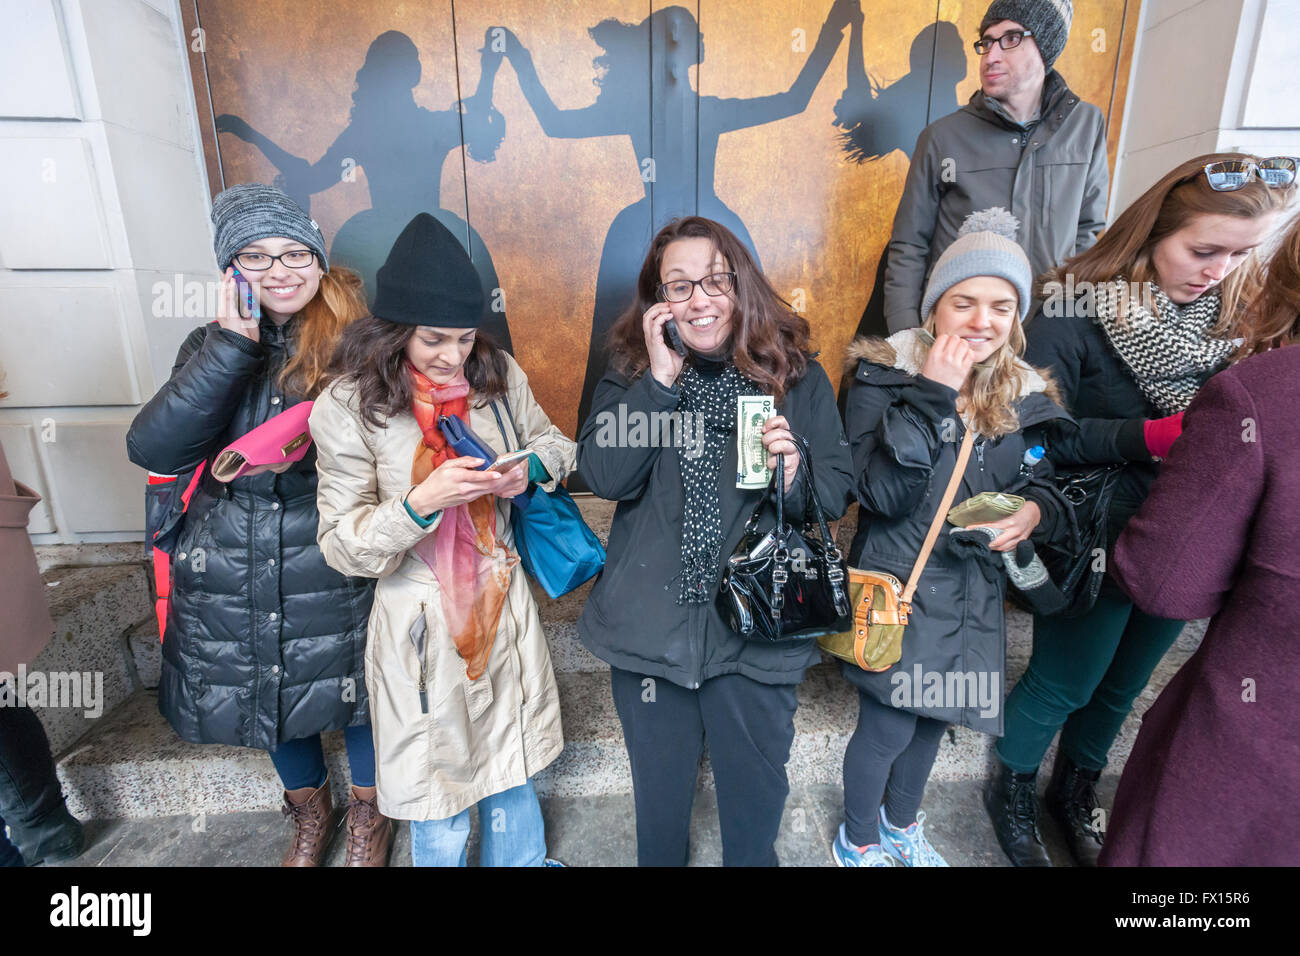 Winners line up with their cash at the Richard Rodgers Theatre in Times Square in New York on Wednesday, April 6, 2016 after their names are called for tickets in the #Ham4Ham lottery for seats for the Broadway blockbuster 'Hamilton'. The $10 live lottery takes place in front of the theater for the Wednesday matinee performance while for the rest of the week's performances the lottery is online. (© Richard B. Levine) Stock Photo